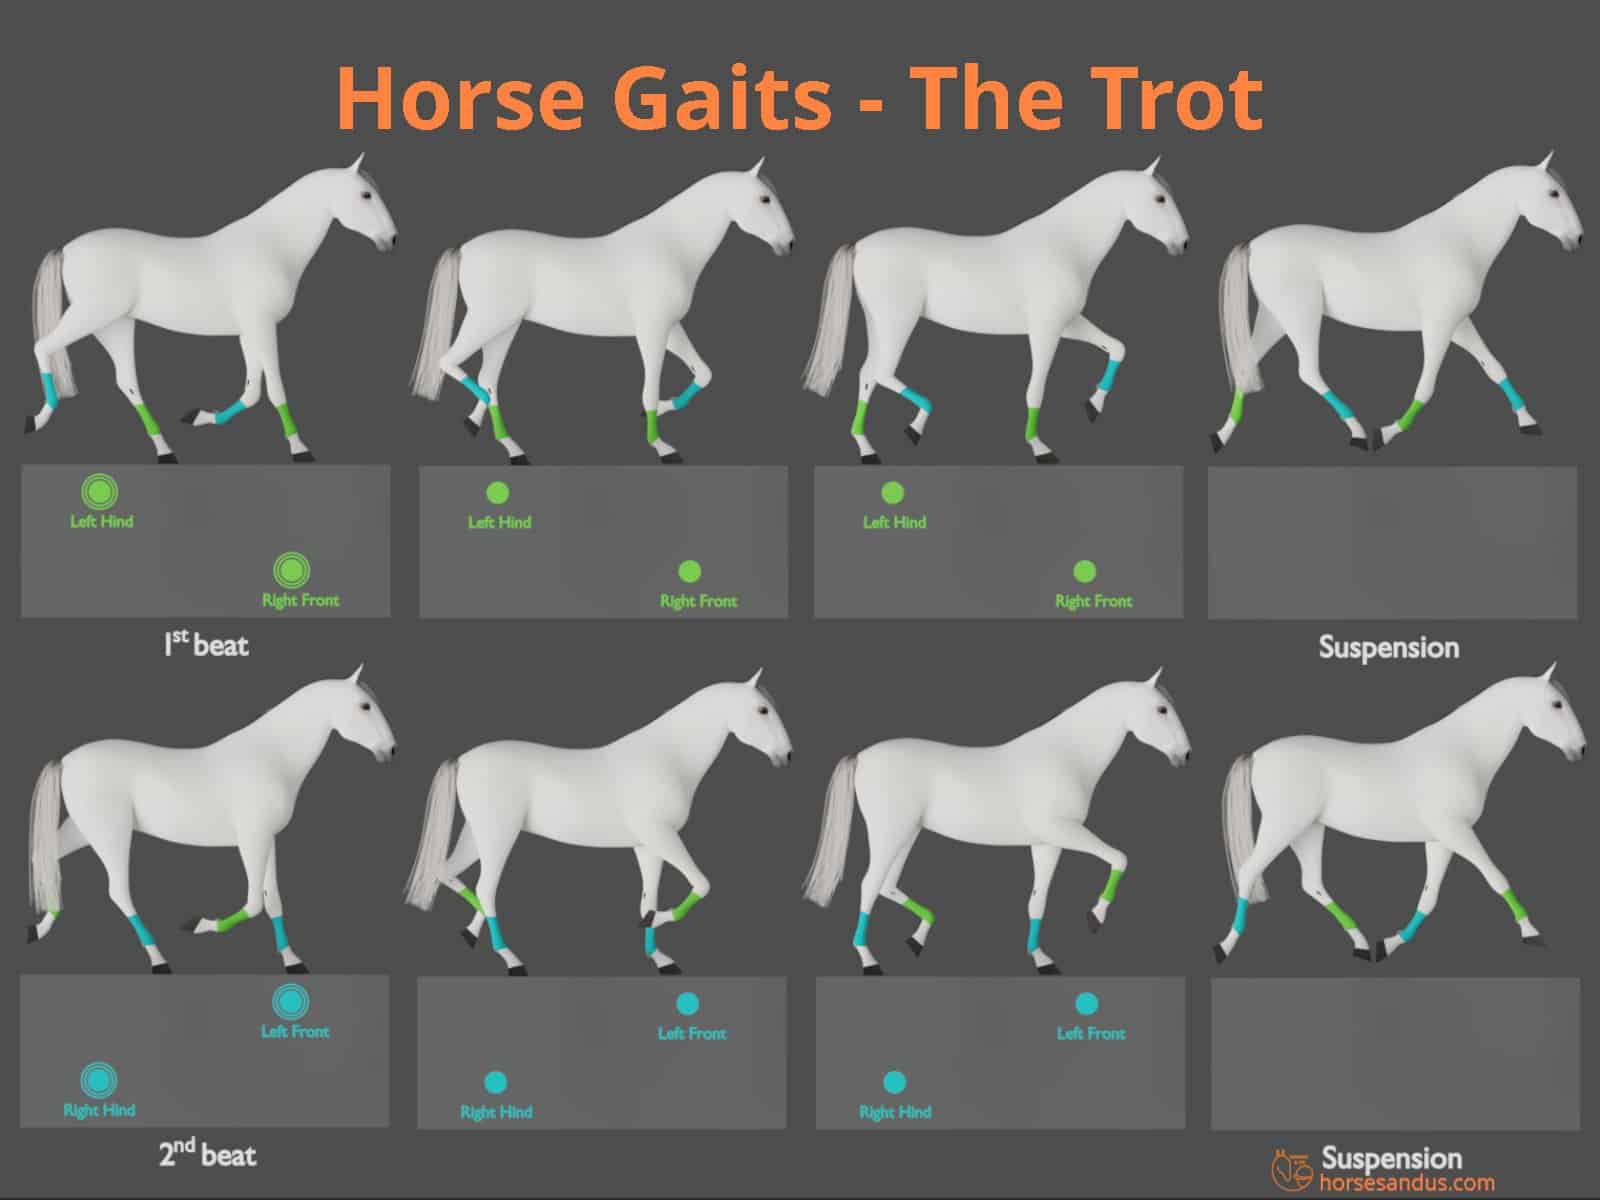 Horse gaits - the trot cycle - diagram